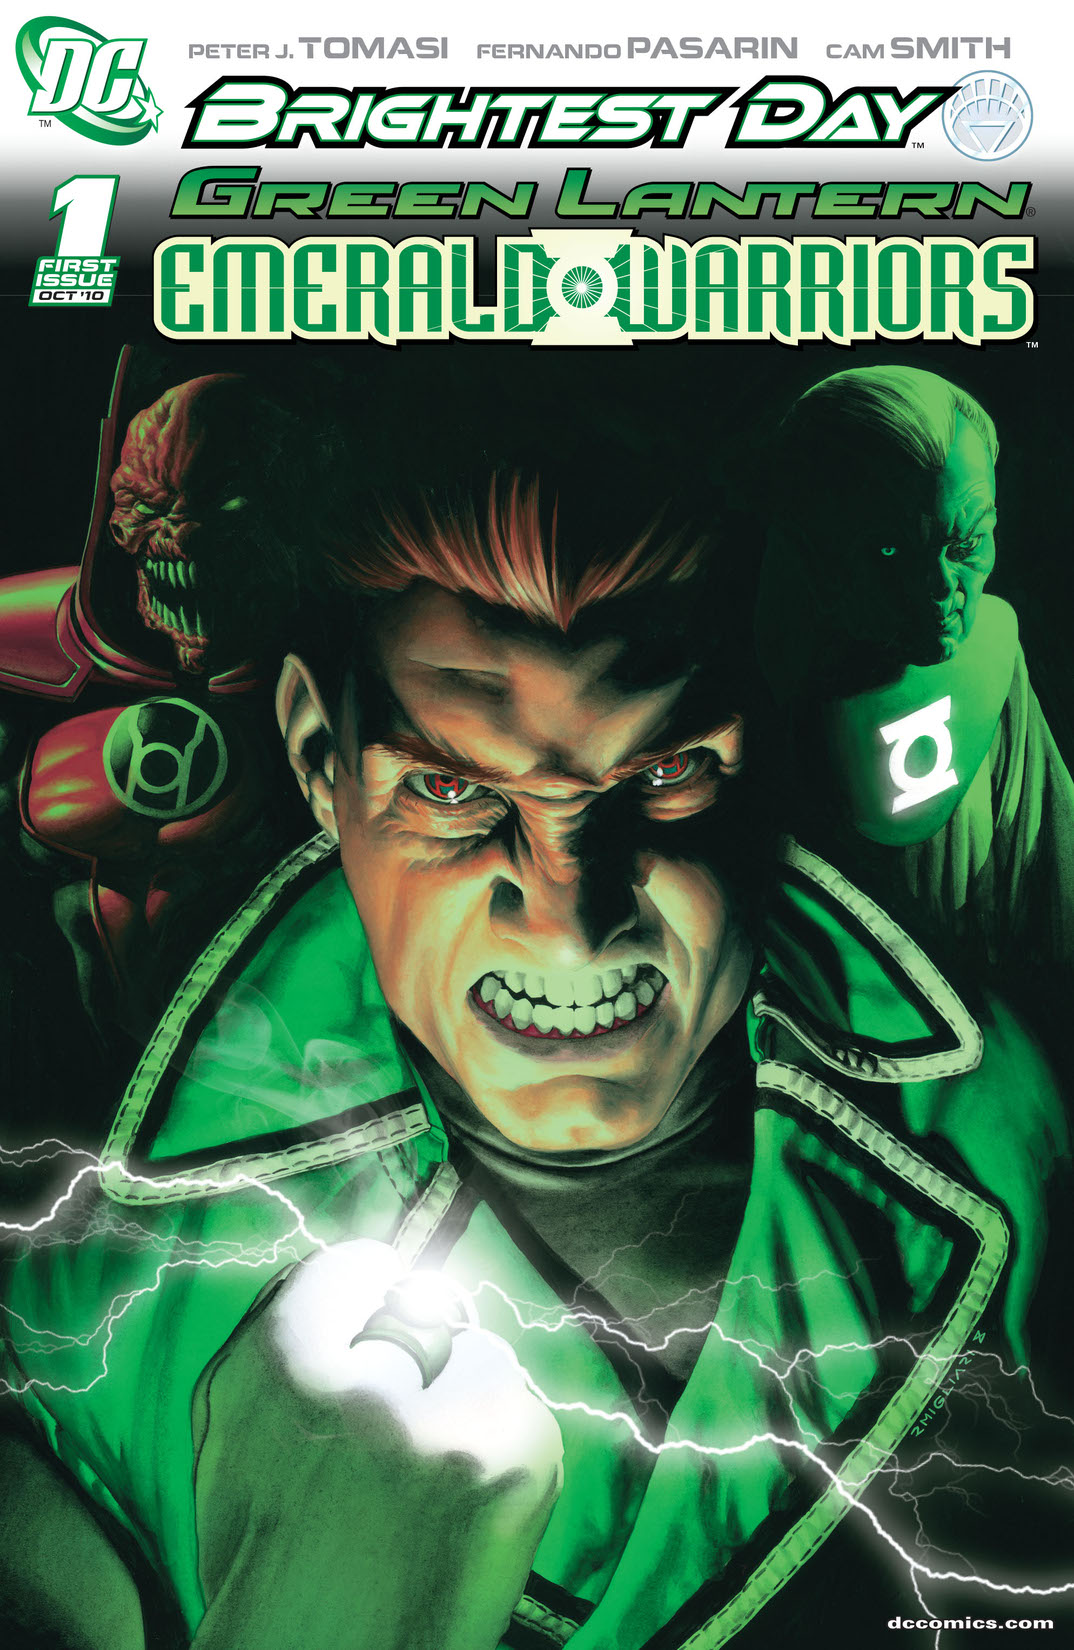 Green Lantern: Emerald Warriors #1 preview images